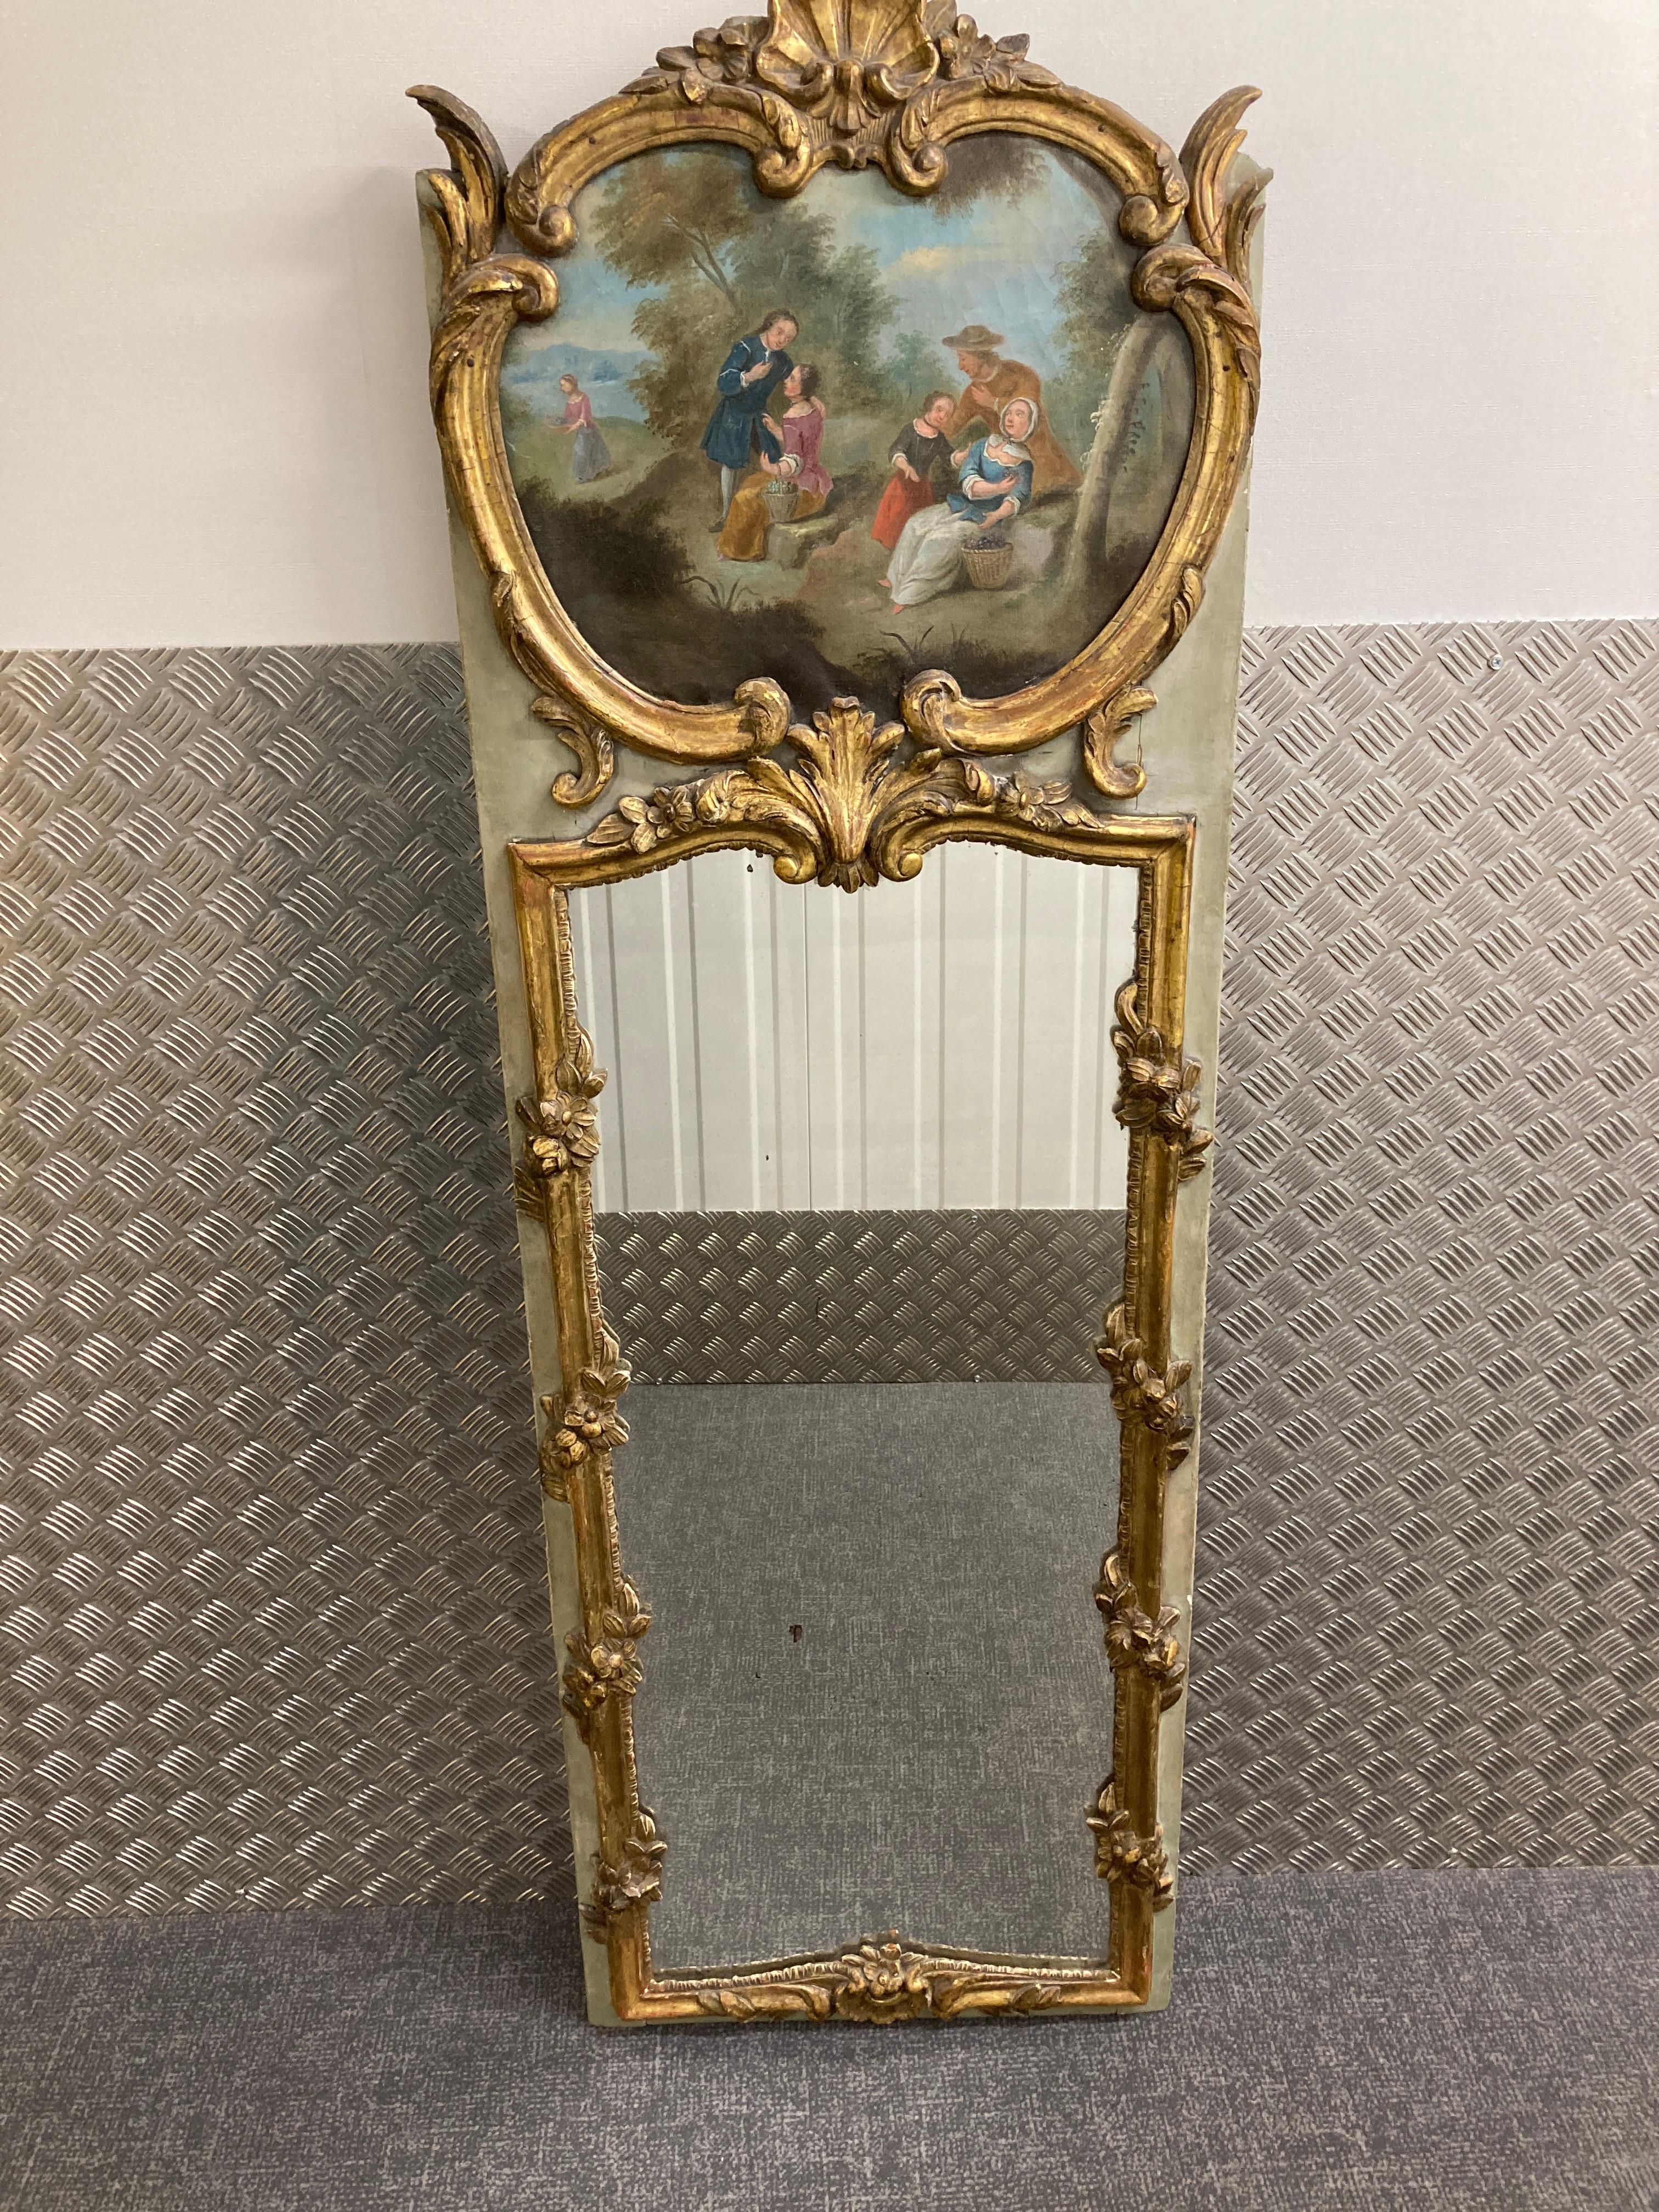 18th Century French Painted and Parcel-Gilt Trumeau Mirror.
The upper section with a romantic oval painted panel of fruit pickers in a cartouche shaped frame with a shell crest, over an oblong original mirror plate within a flower entwined slender